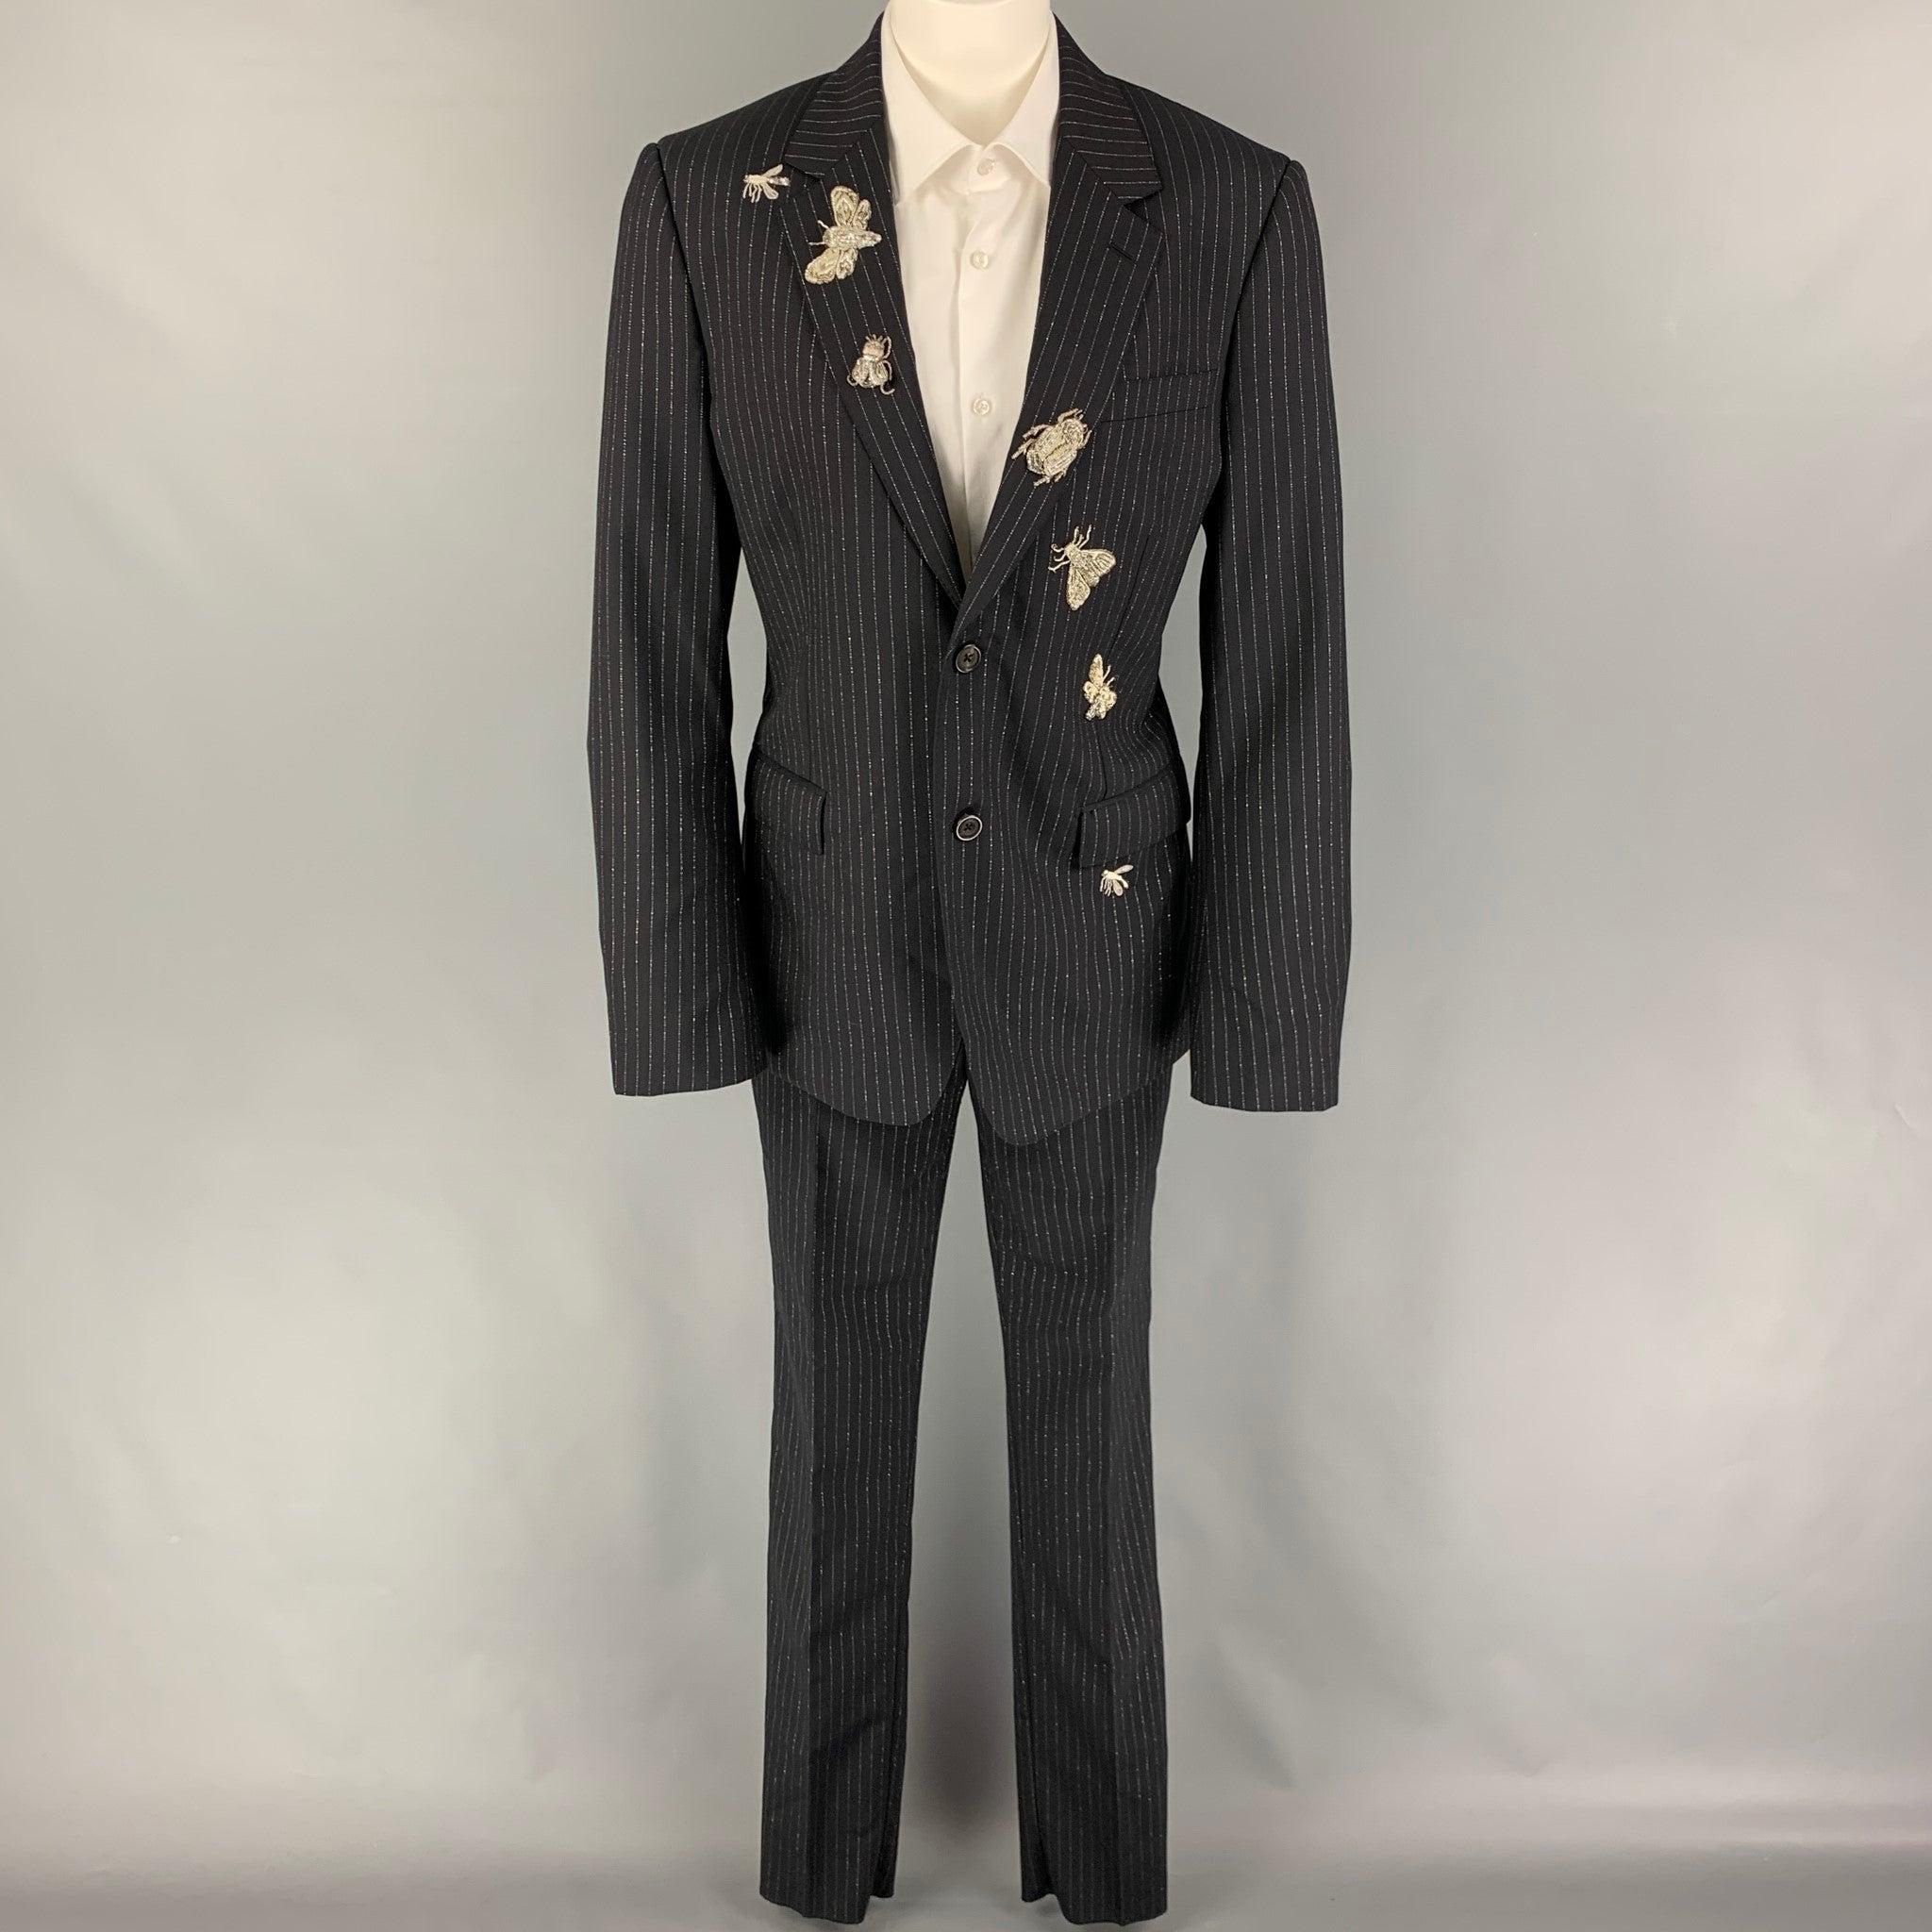 ALEXANDER McQUEEN
suit comes in a black & silver stripe wool blend with beaded insect embellishment details and includes a single breasted, double button sport coat with a notch lapel and matching flat front trousers. Made in Italy. New with tags. 